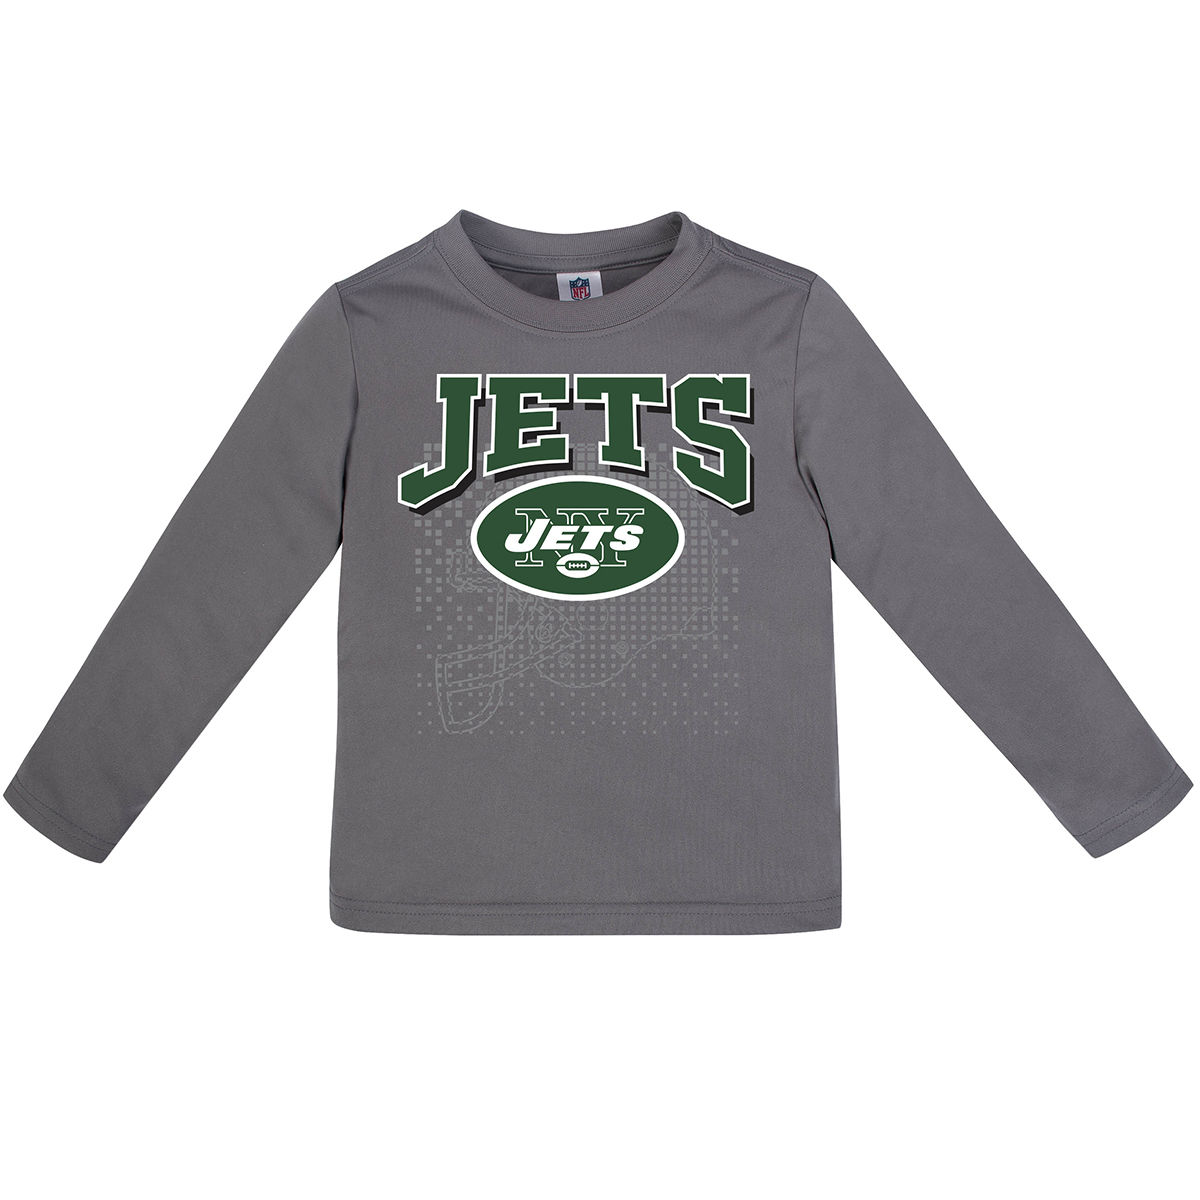 New York Jets Toddler Boys' Poly Long-Sleeve Tee - Black, 4T